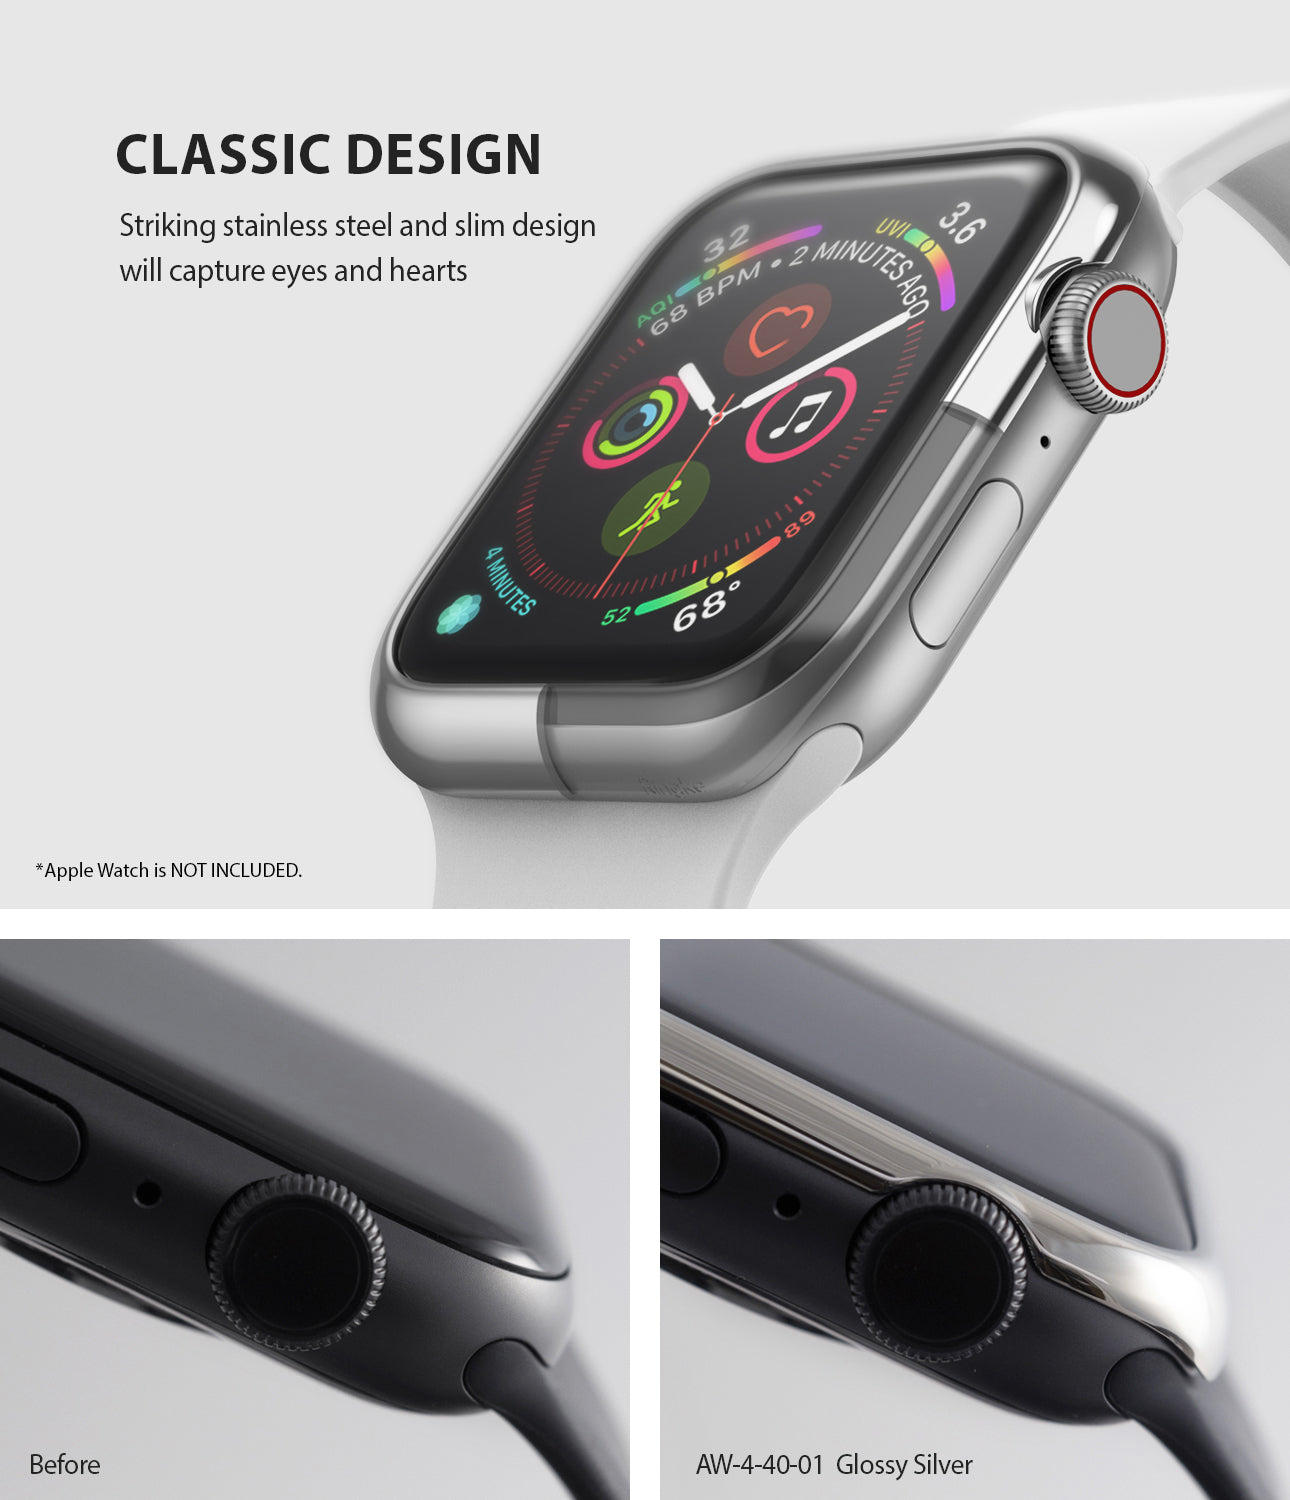 ringke bezel styling 40-01 glossy silver stainless steel on apple watch series 6 / 5 / 4 / SE 40mm classic design